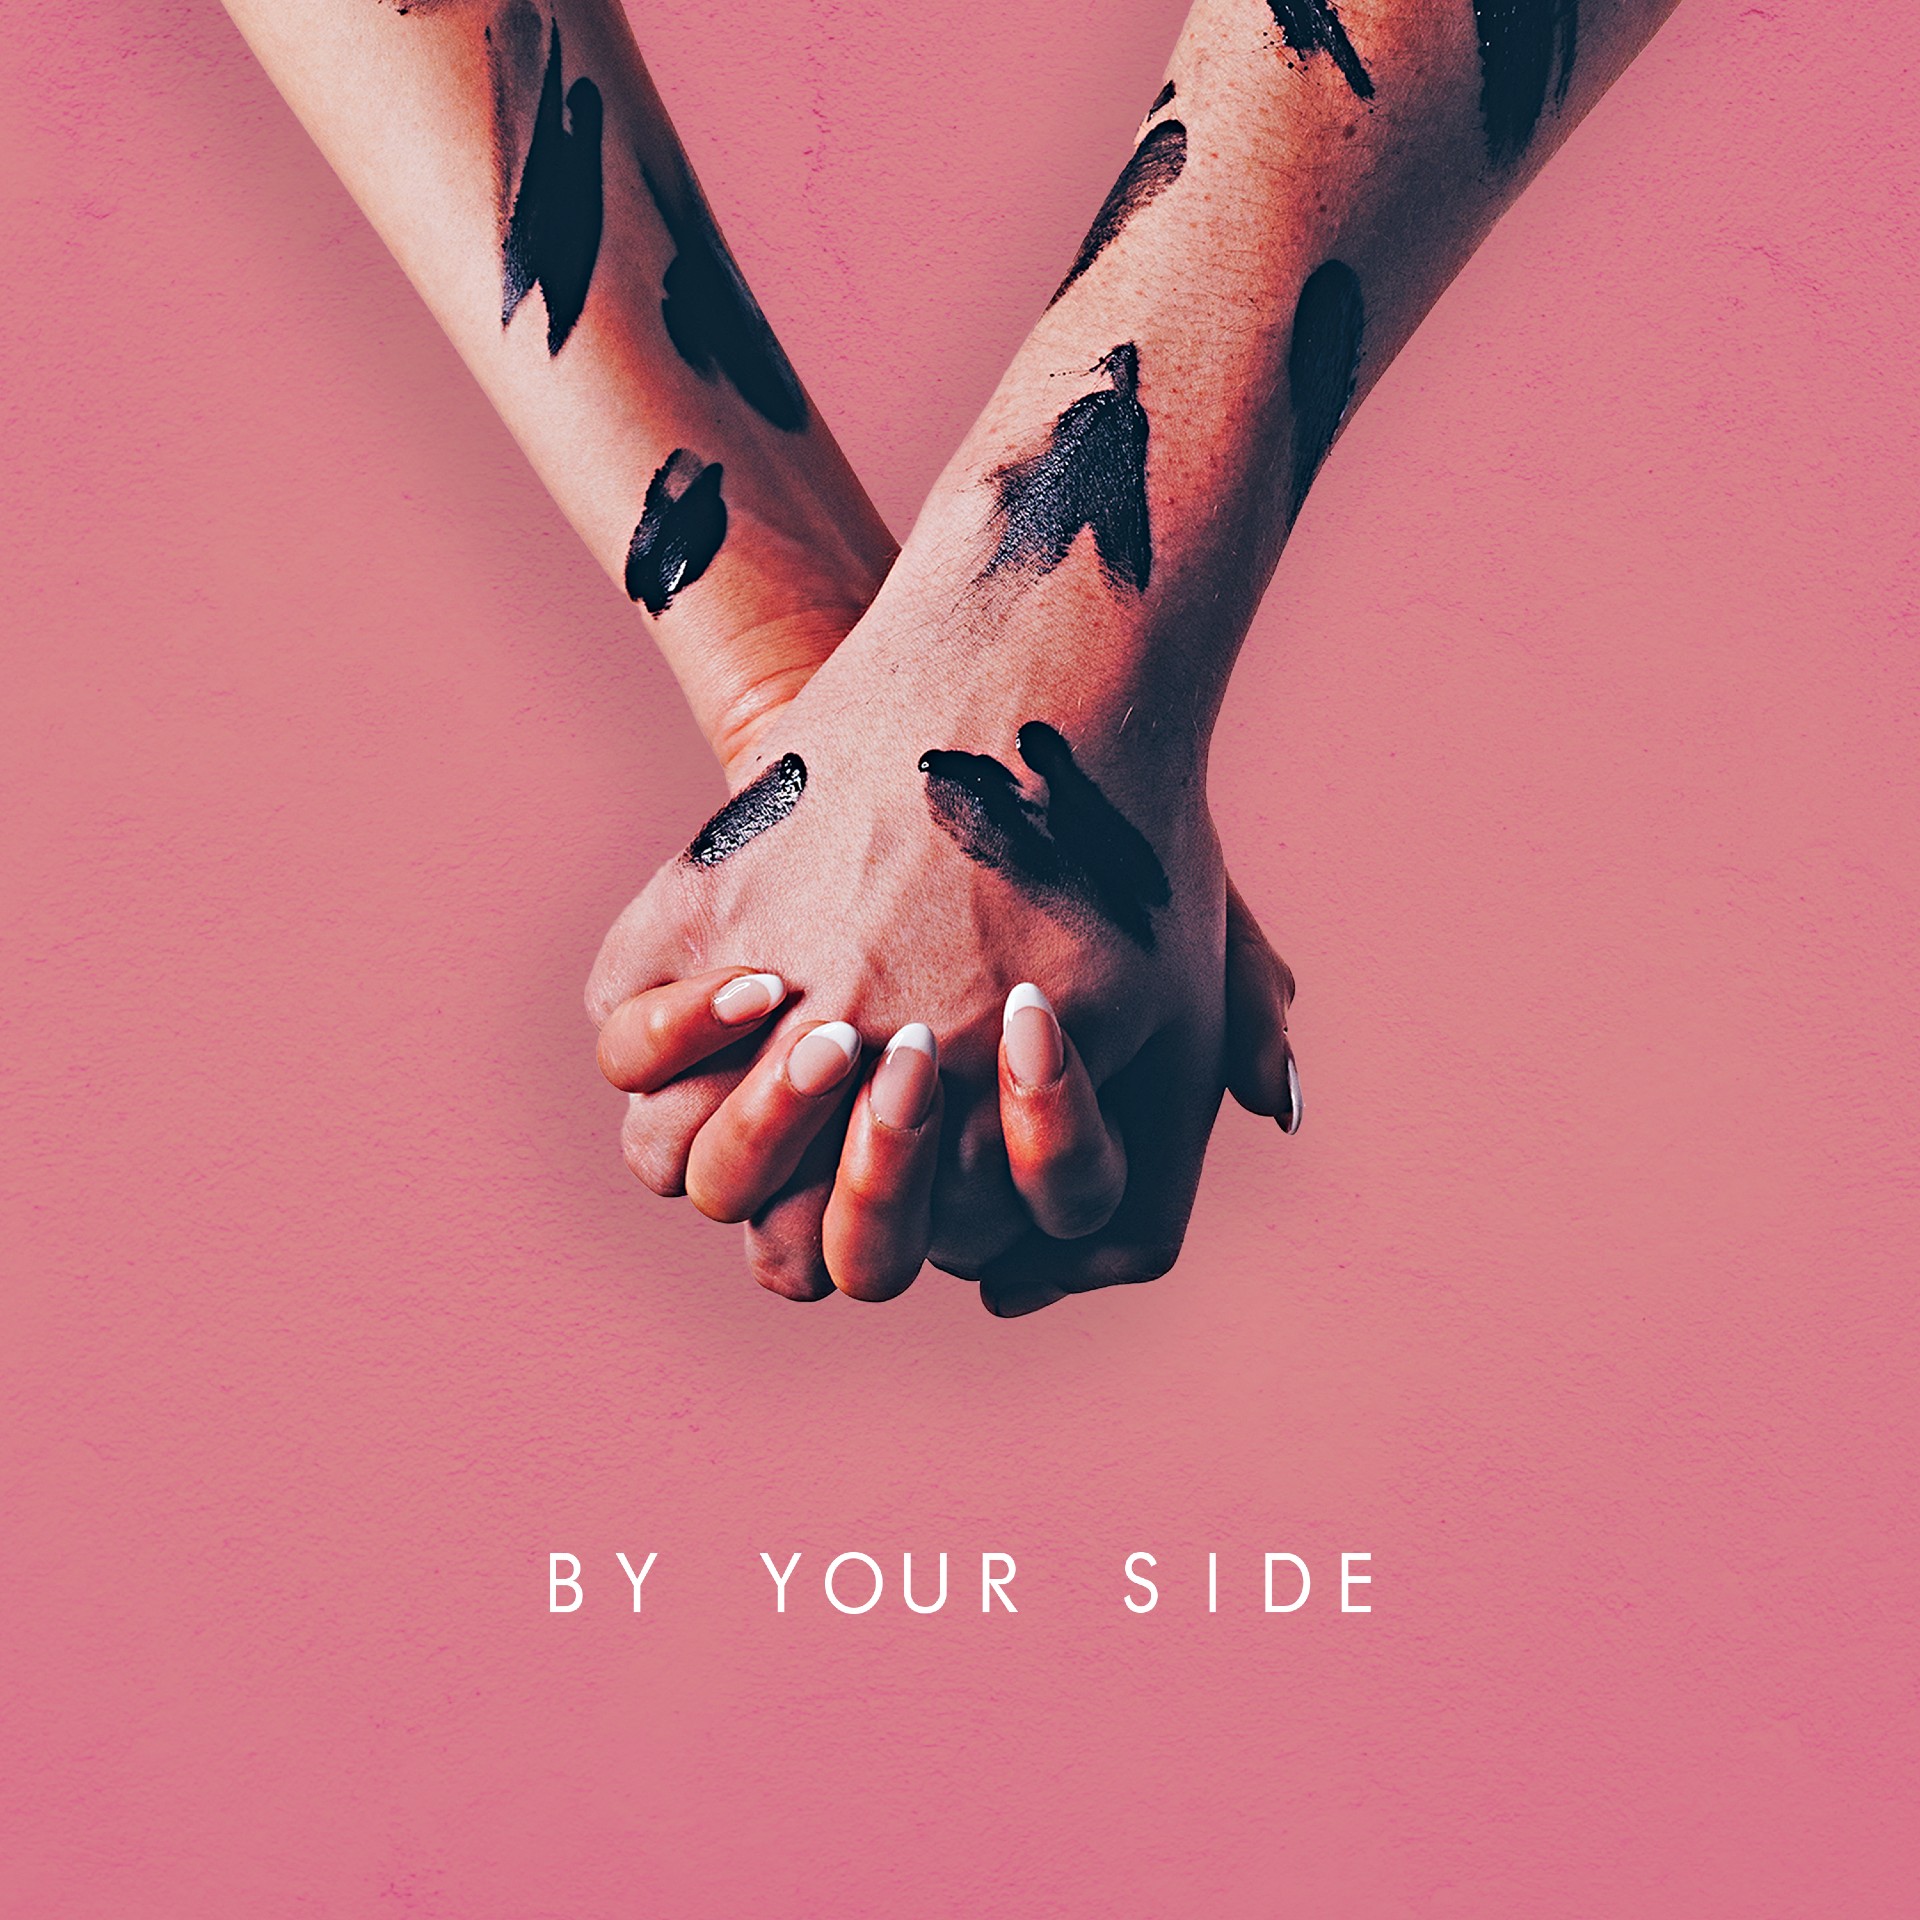 Conor Maynard “By Your Side” single artwork